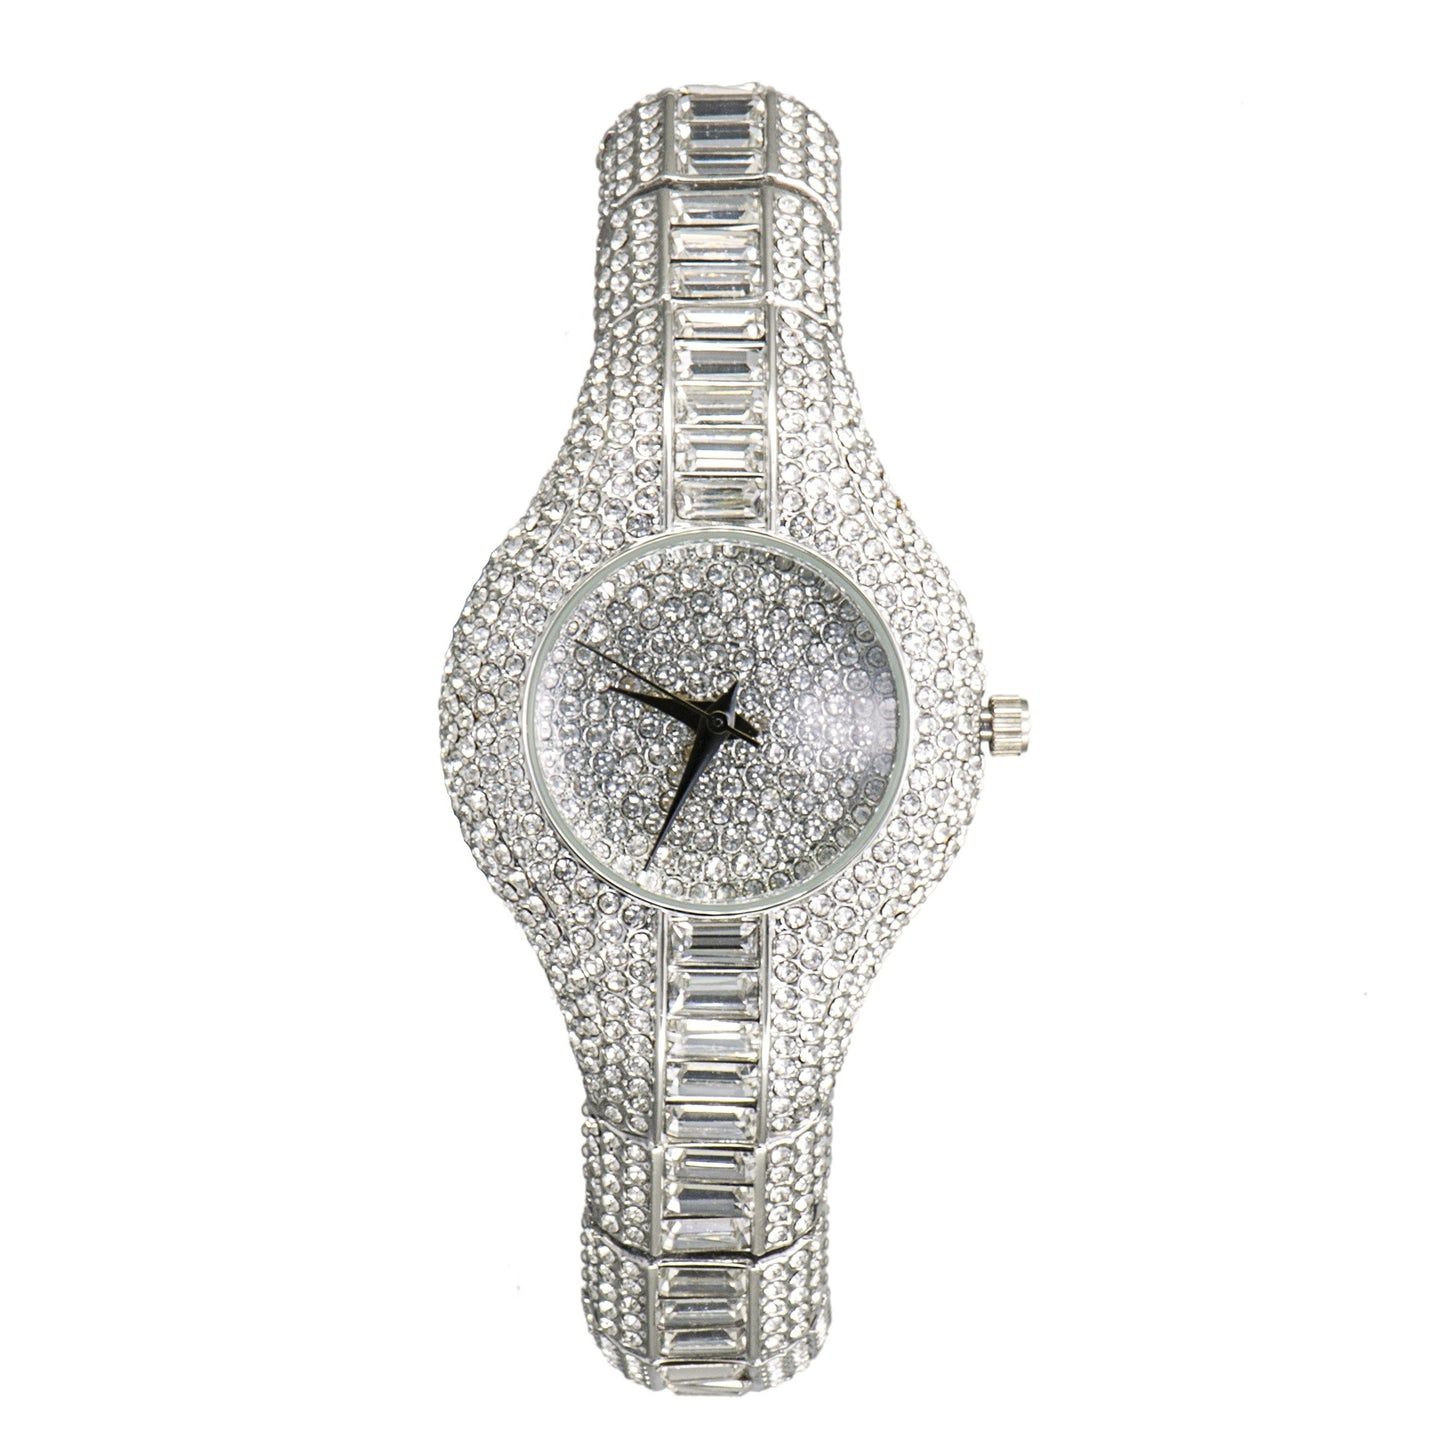 Fashion Watch With Diamonds And Colorful Stones